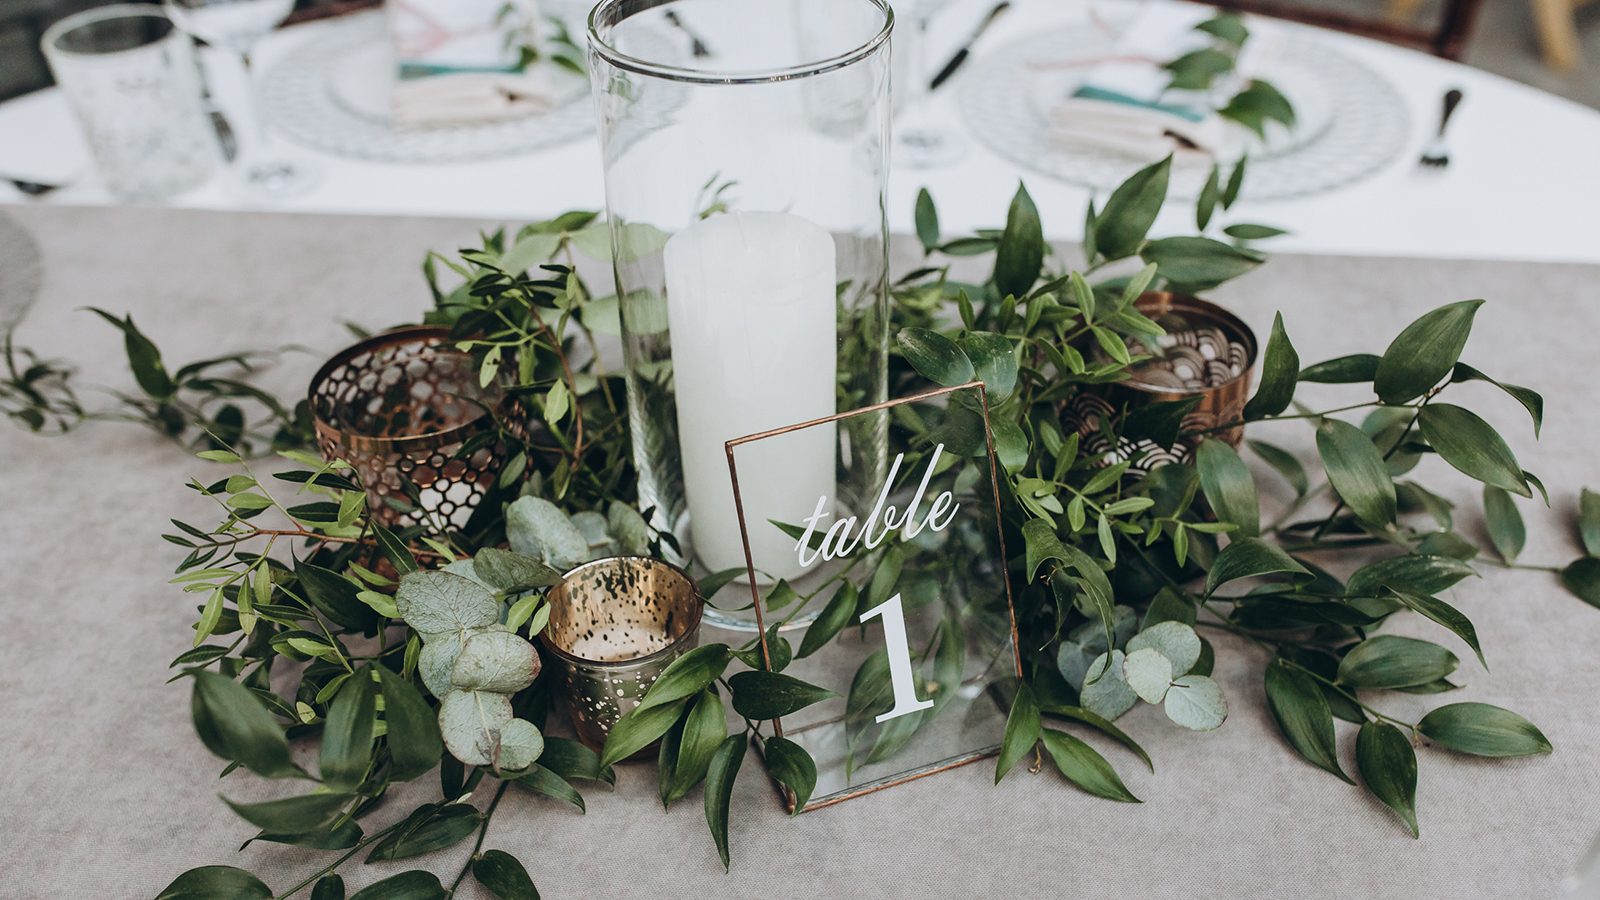 on table with gray tablecloth is a candle in candlestick, plate with number and composition of greenery